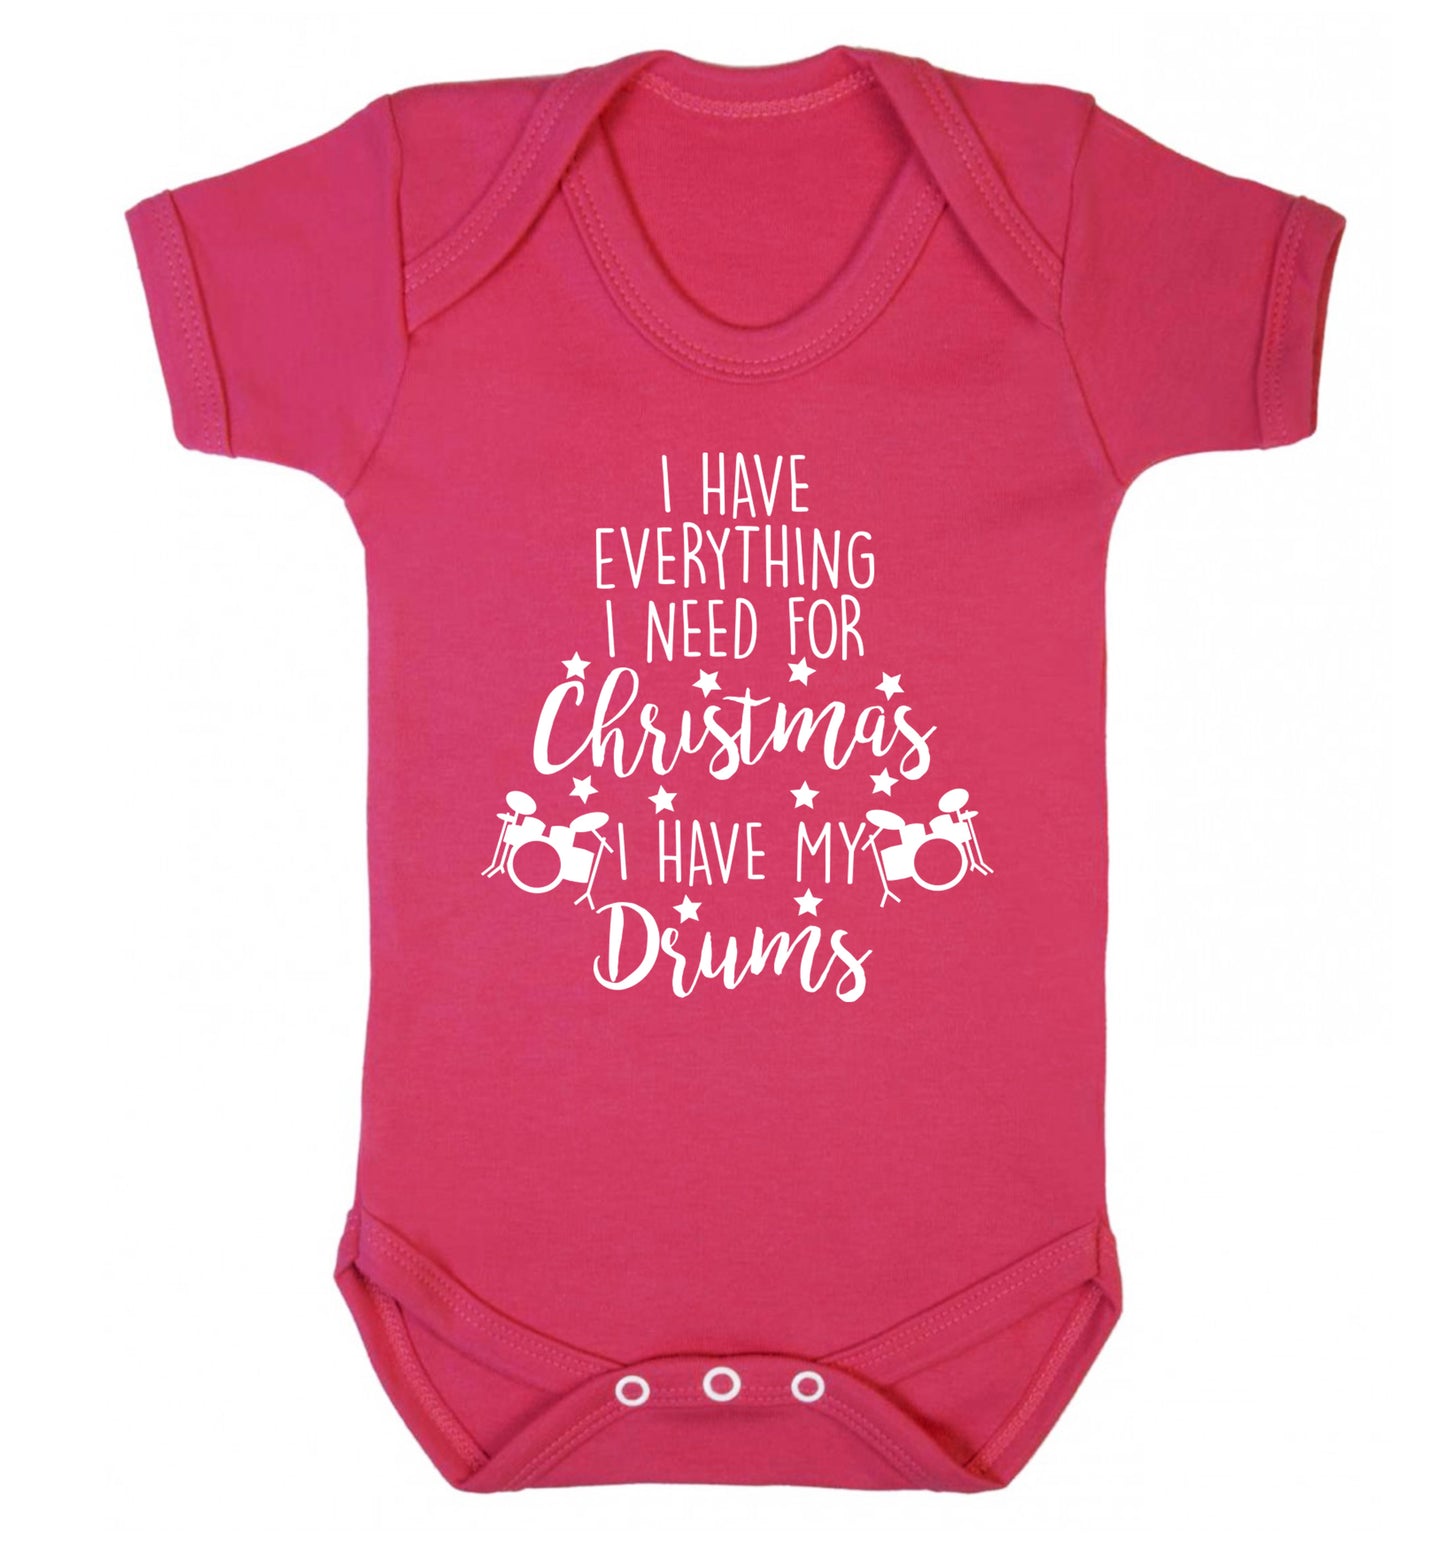 I have everything I need for Christmas I have my drums! Baby Vest dark pink 18-24 months